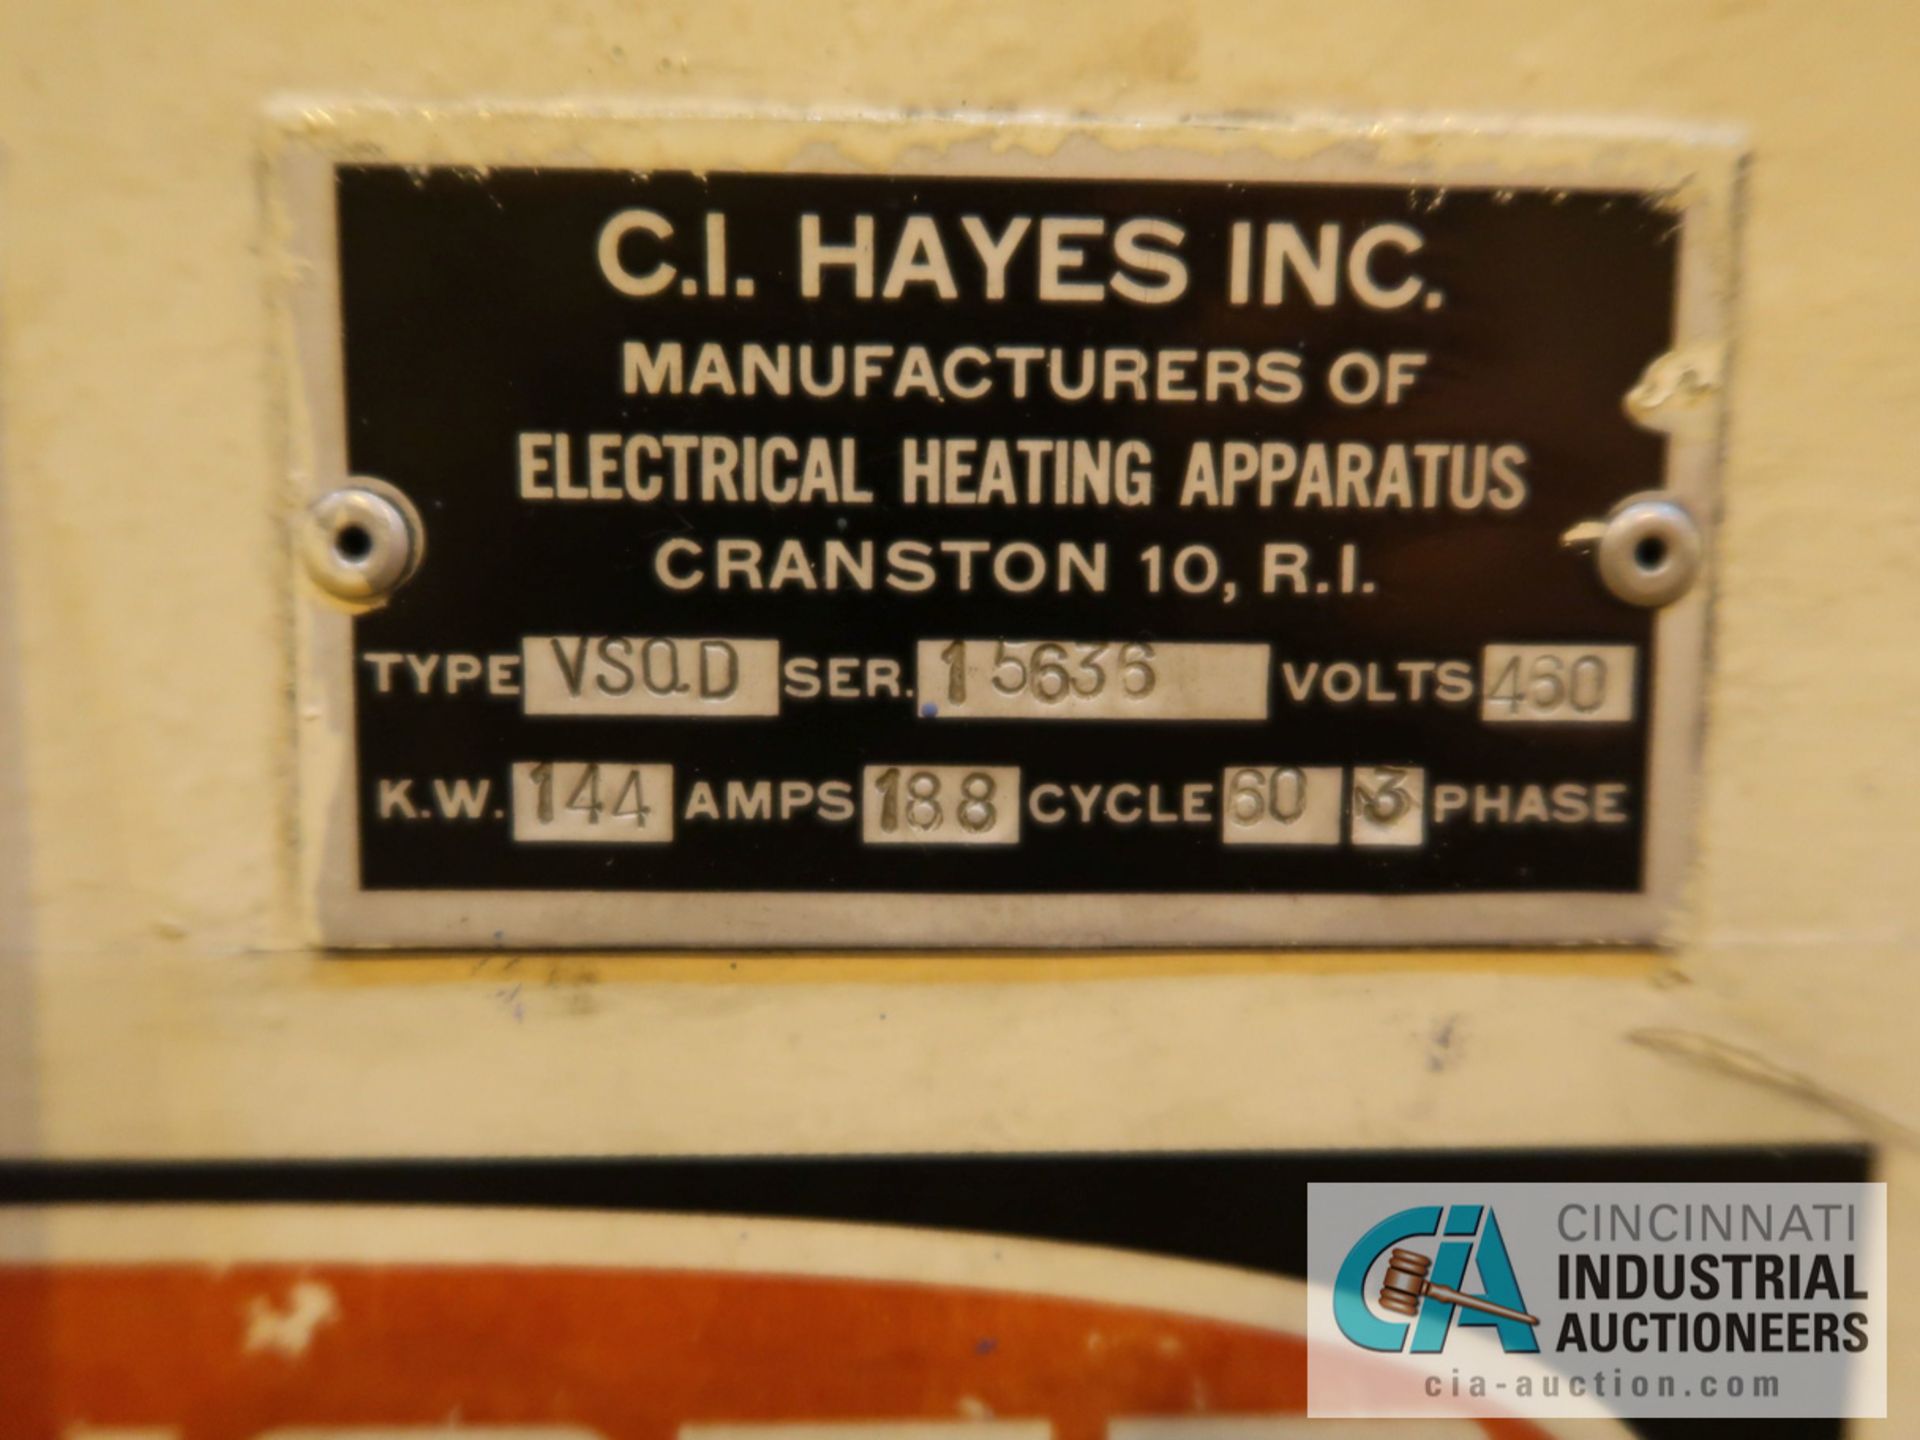 C.I. HAYES MODEL VSQD-202436 VACUUM QUENCH FURNACE; S/N 15636, - Image 13 of 14